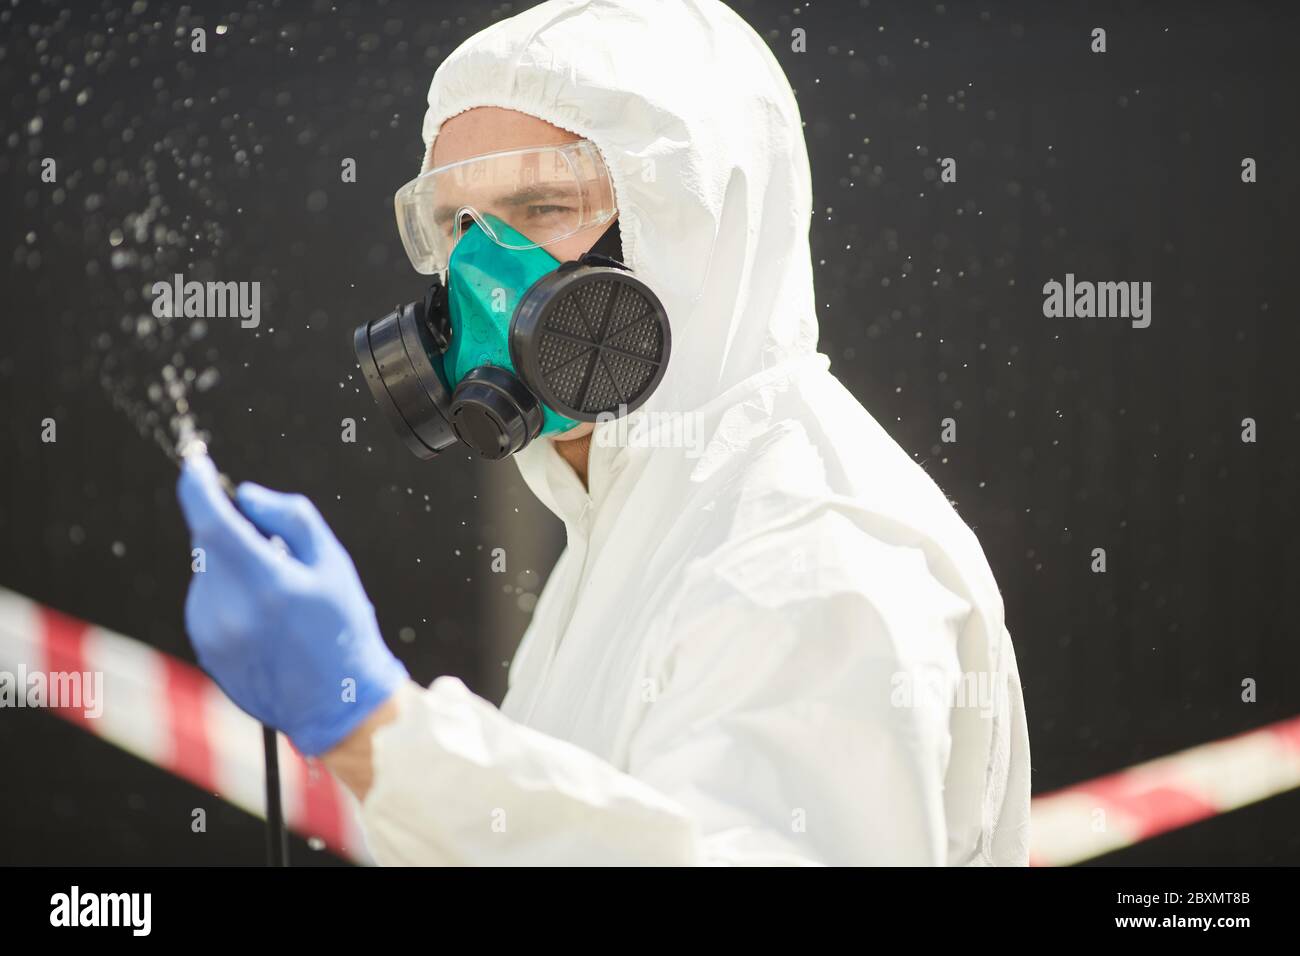 Chest up portrait of male worker wearing hazmat suit holding disinfection gear while standing outdoors with red caution tape in background Stock Photo